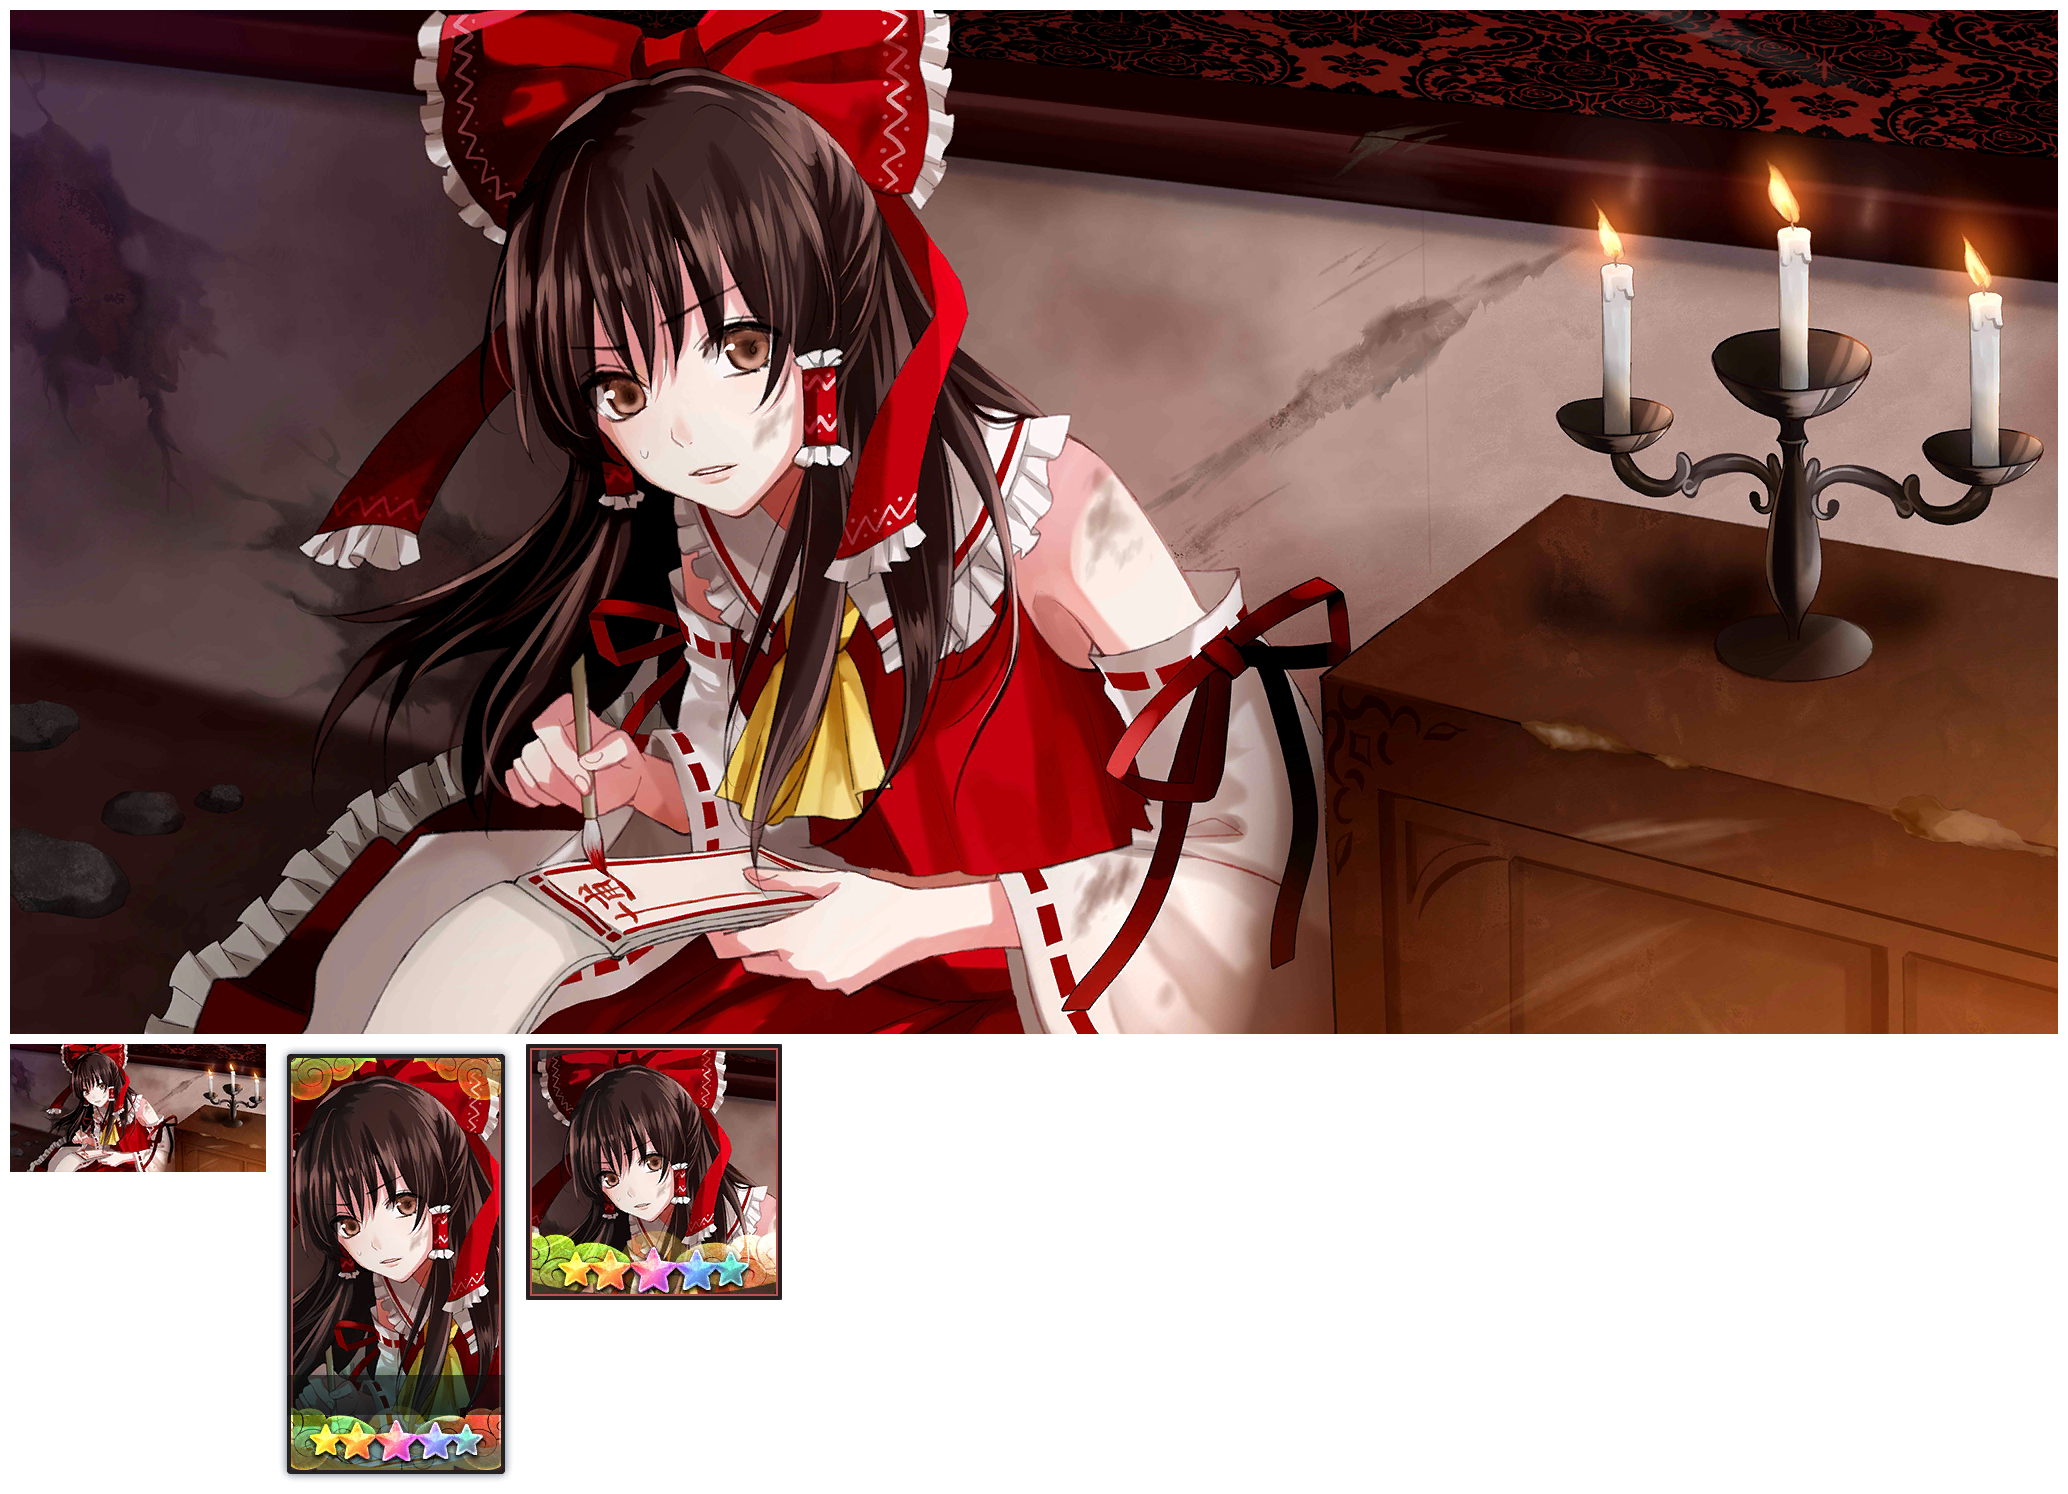 Behind the Bullets: Reimu